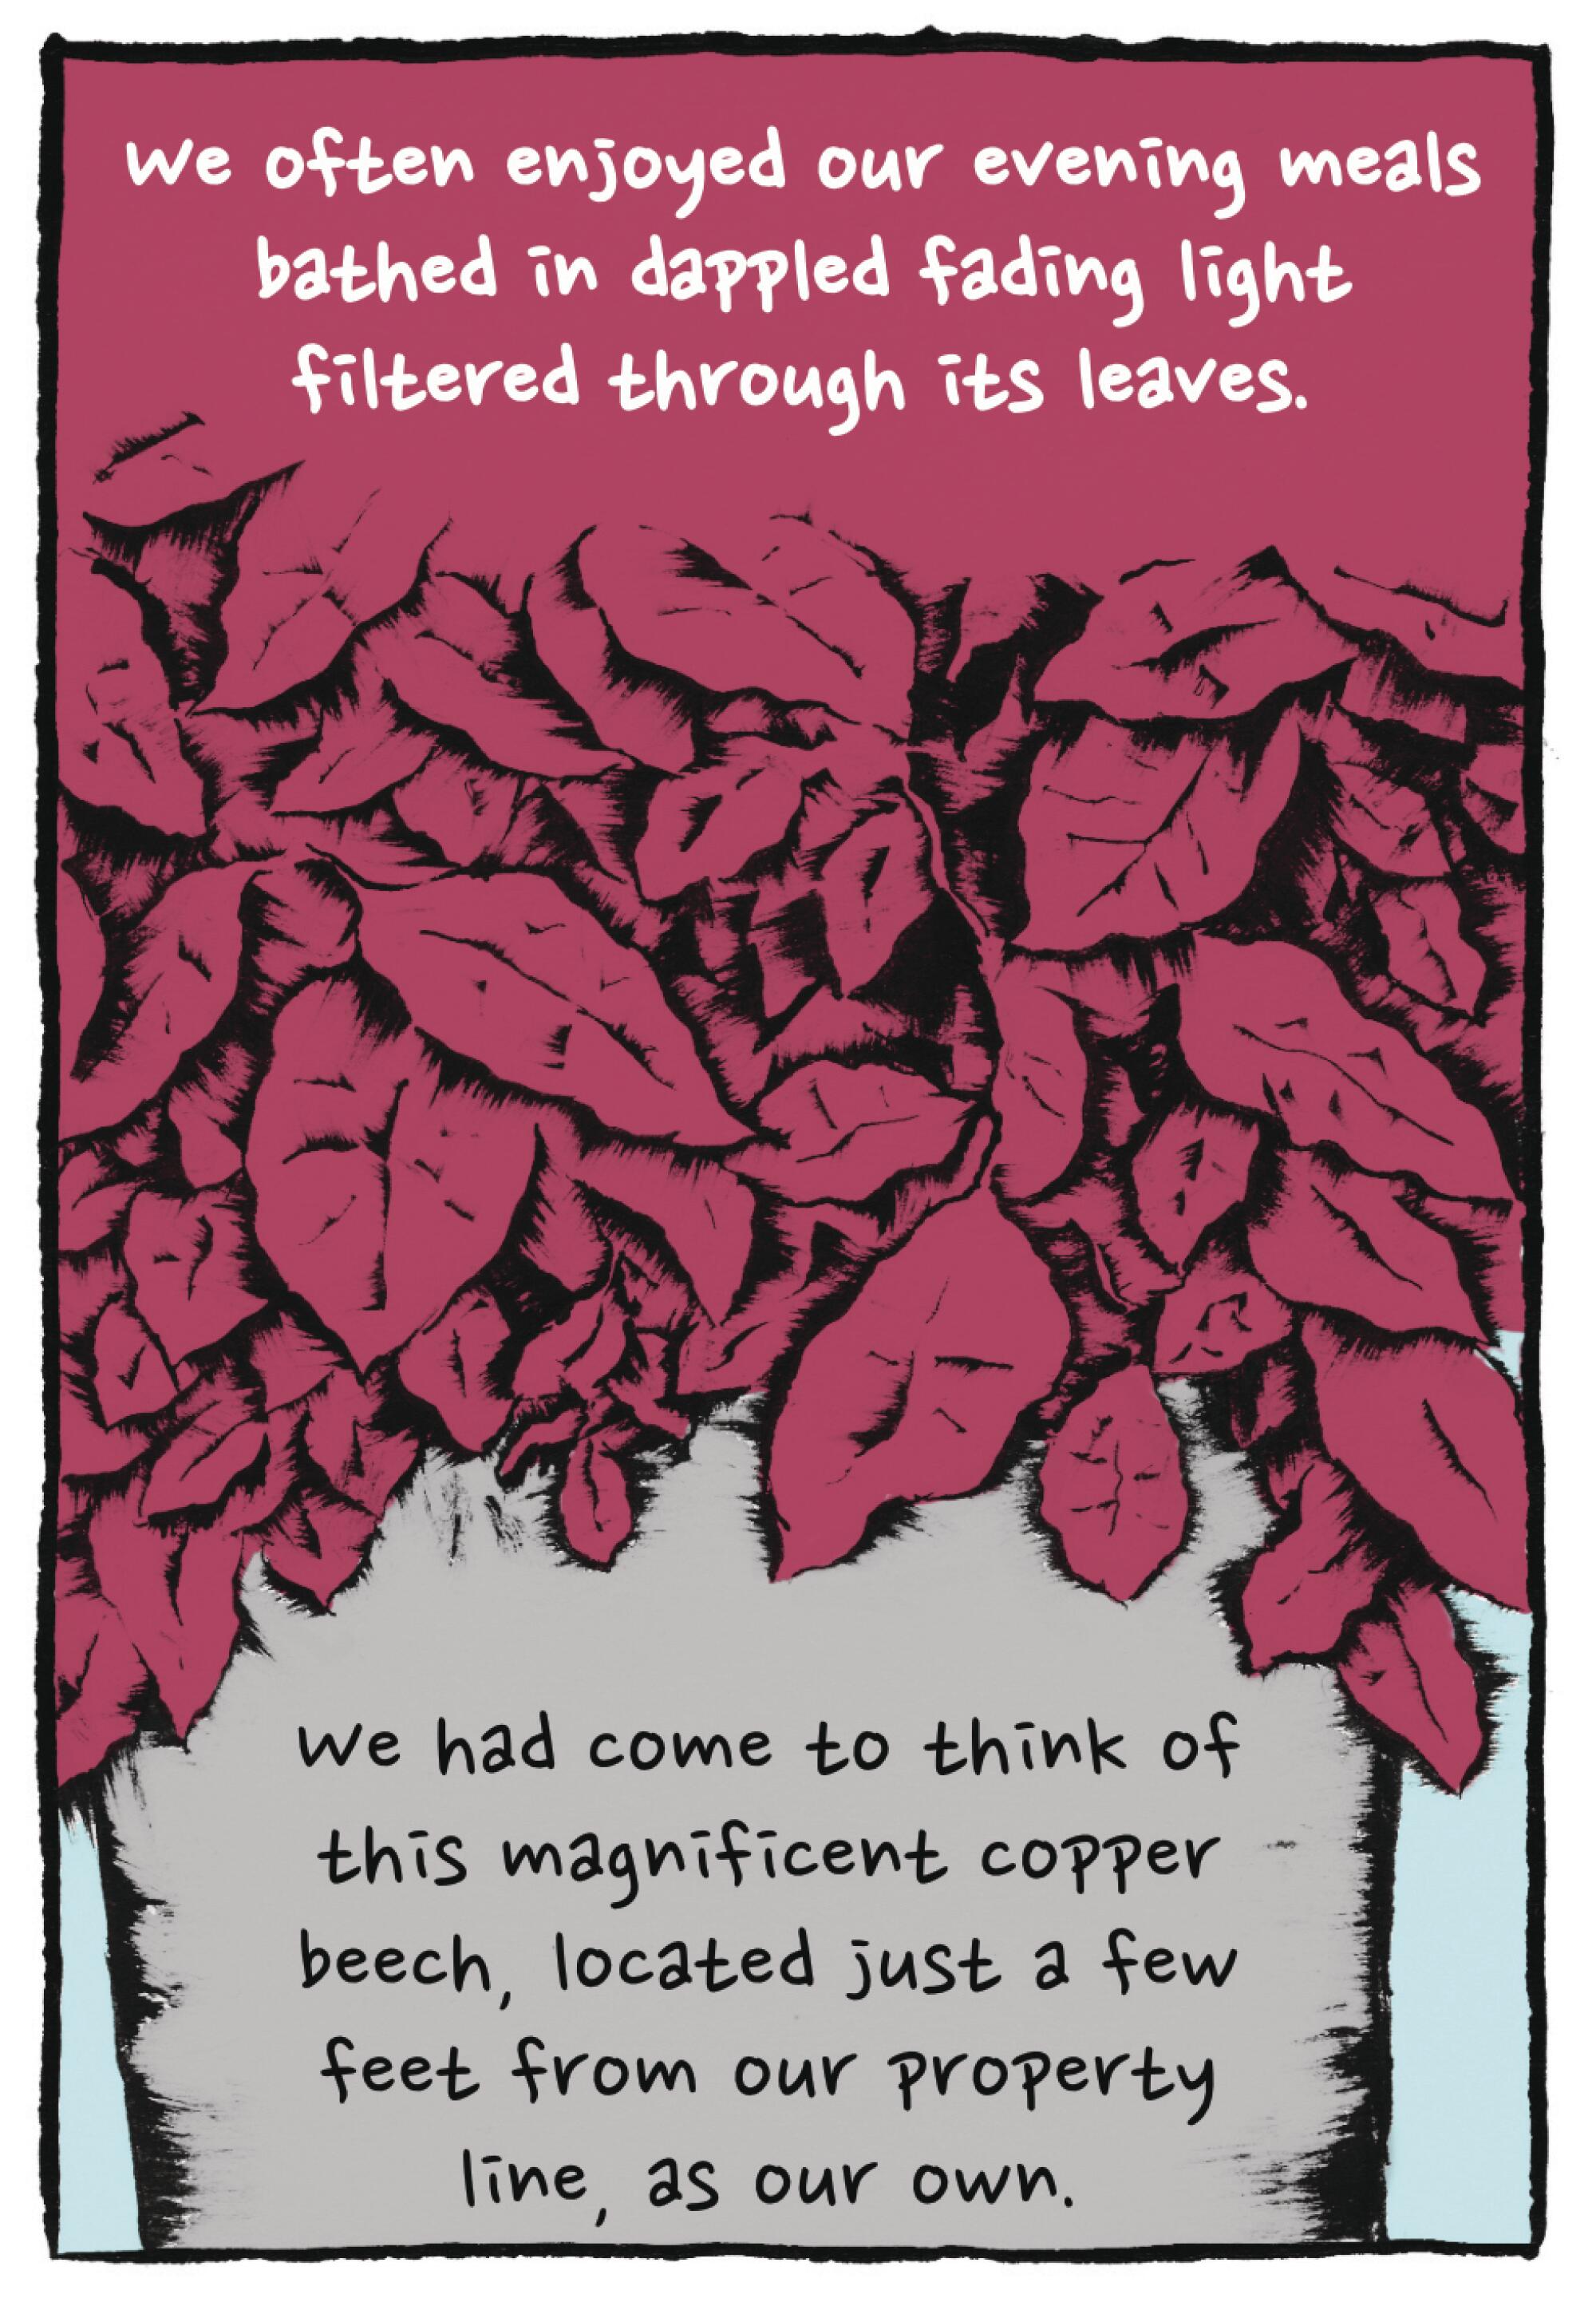 Illustration of a tree. "We had come to think of this magnificent copper beech located feet from our property as our own"